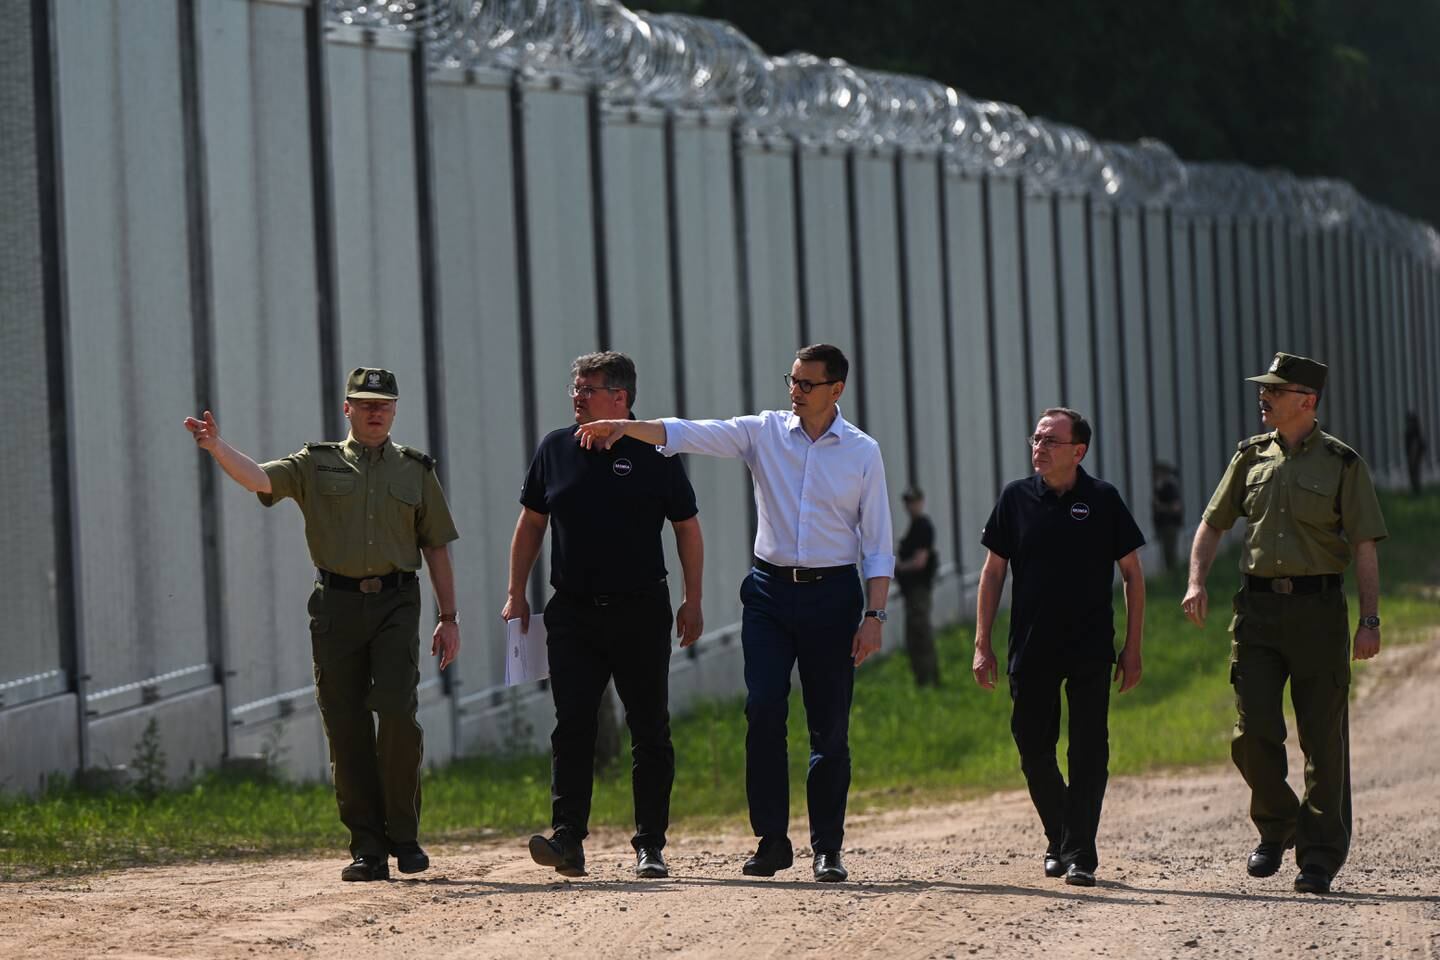 Prime Minister Mateusz Morawiecki visits the metal border wall. Getty Images